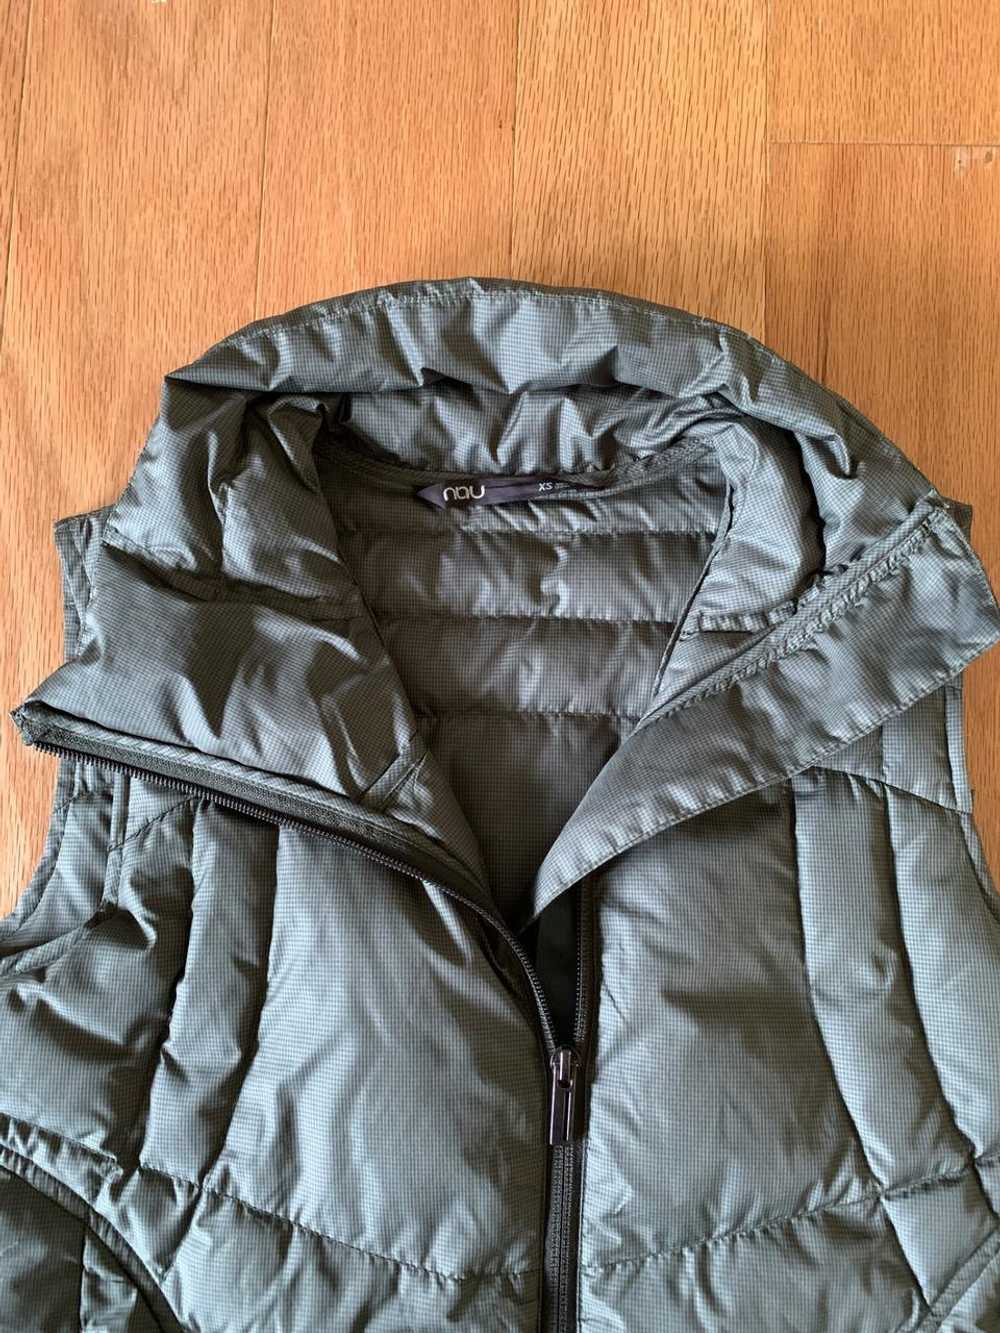 nau down vest (XS) | Used, Secondhand, Resell - image 3